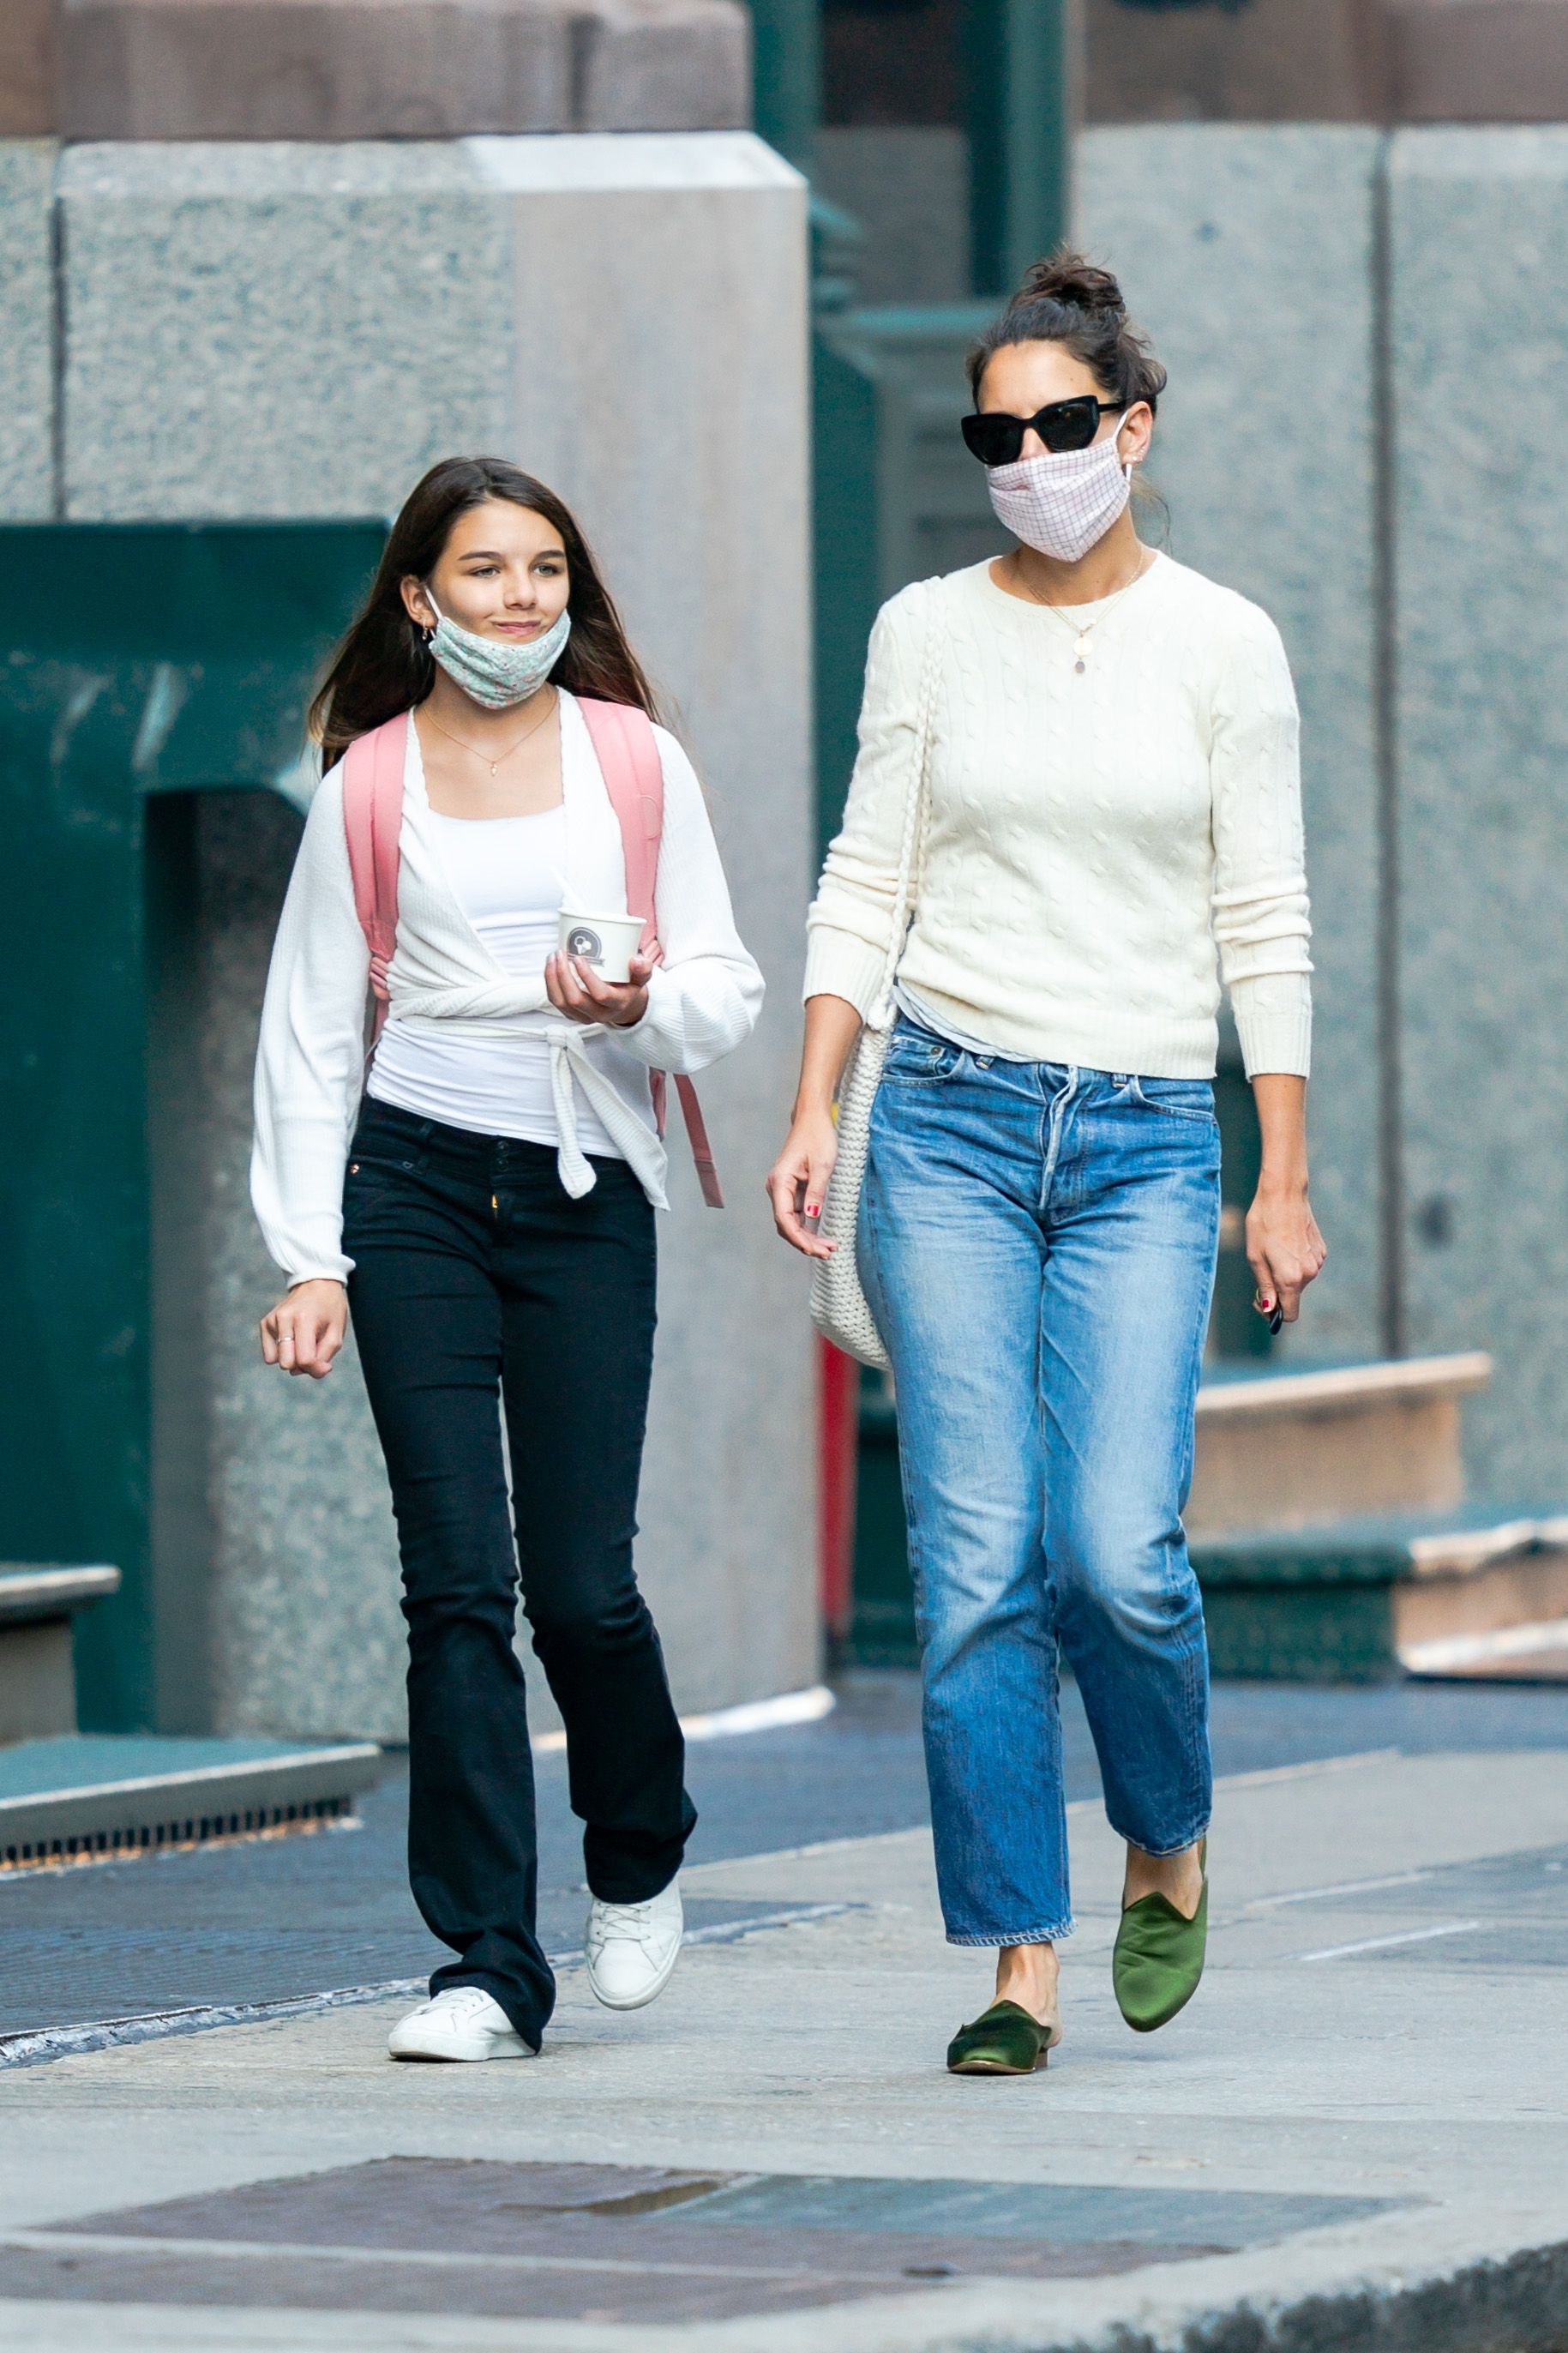 Suri Cruise and Katie Holmes on September 08, 2020 in New York City | Source: Getty Images